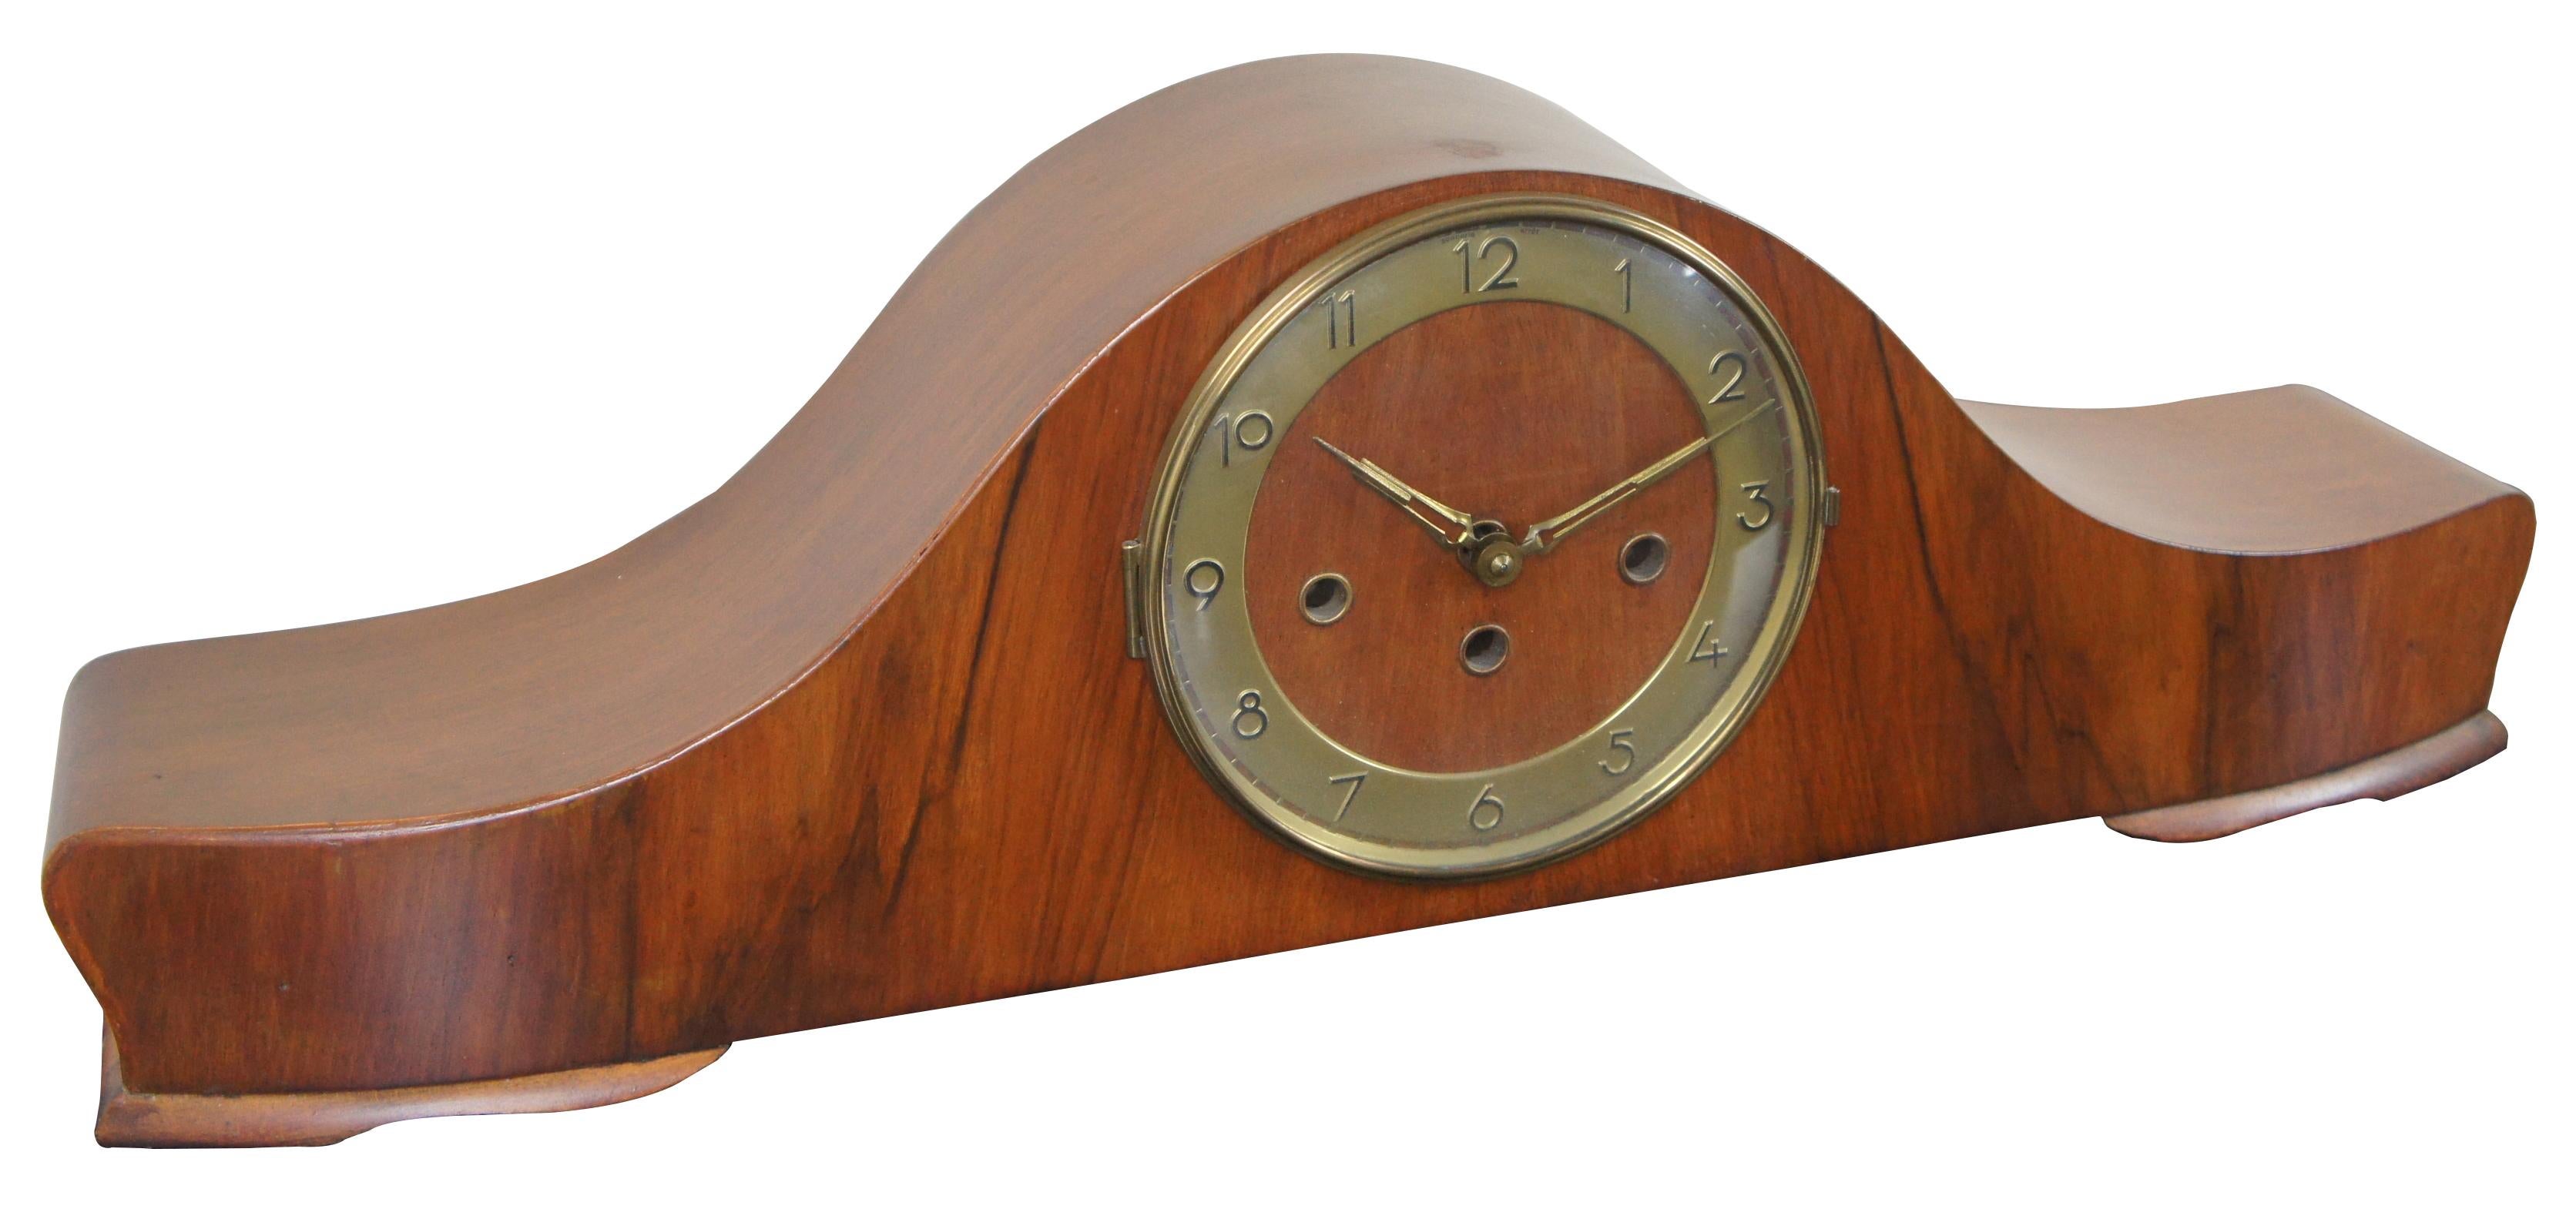 Antique Art Deco style, key wound, chiming mantel clock with a wooden oxbow/yoke shaped case and brass numbers. Measures: 26